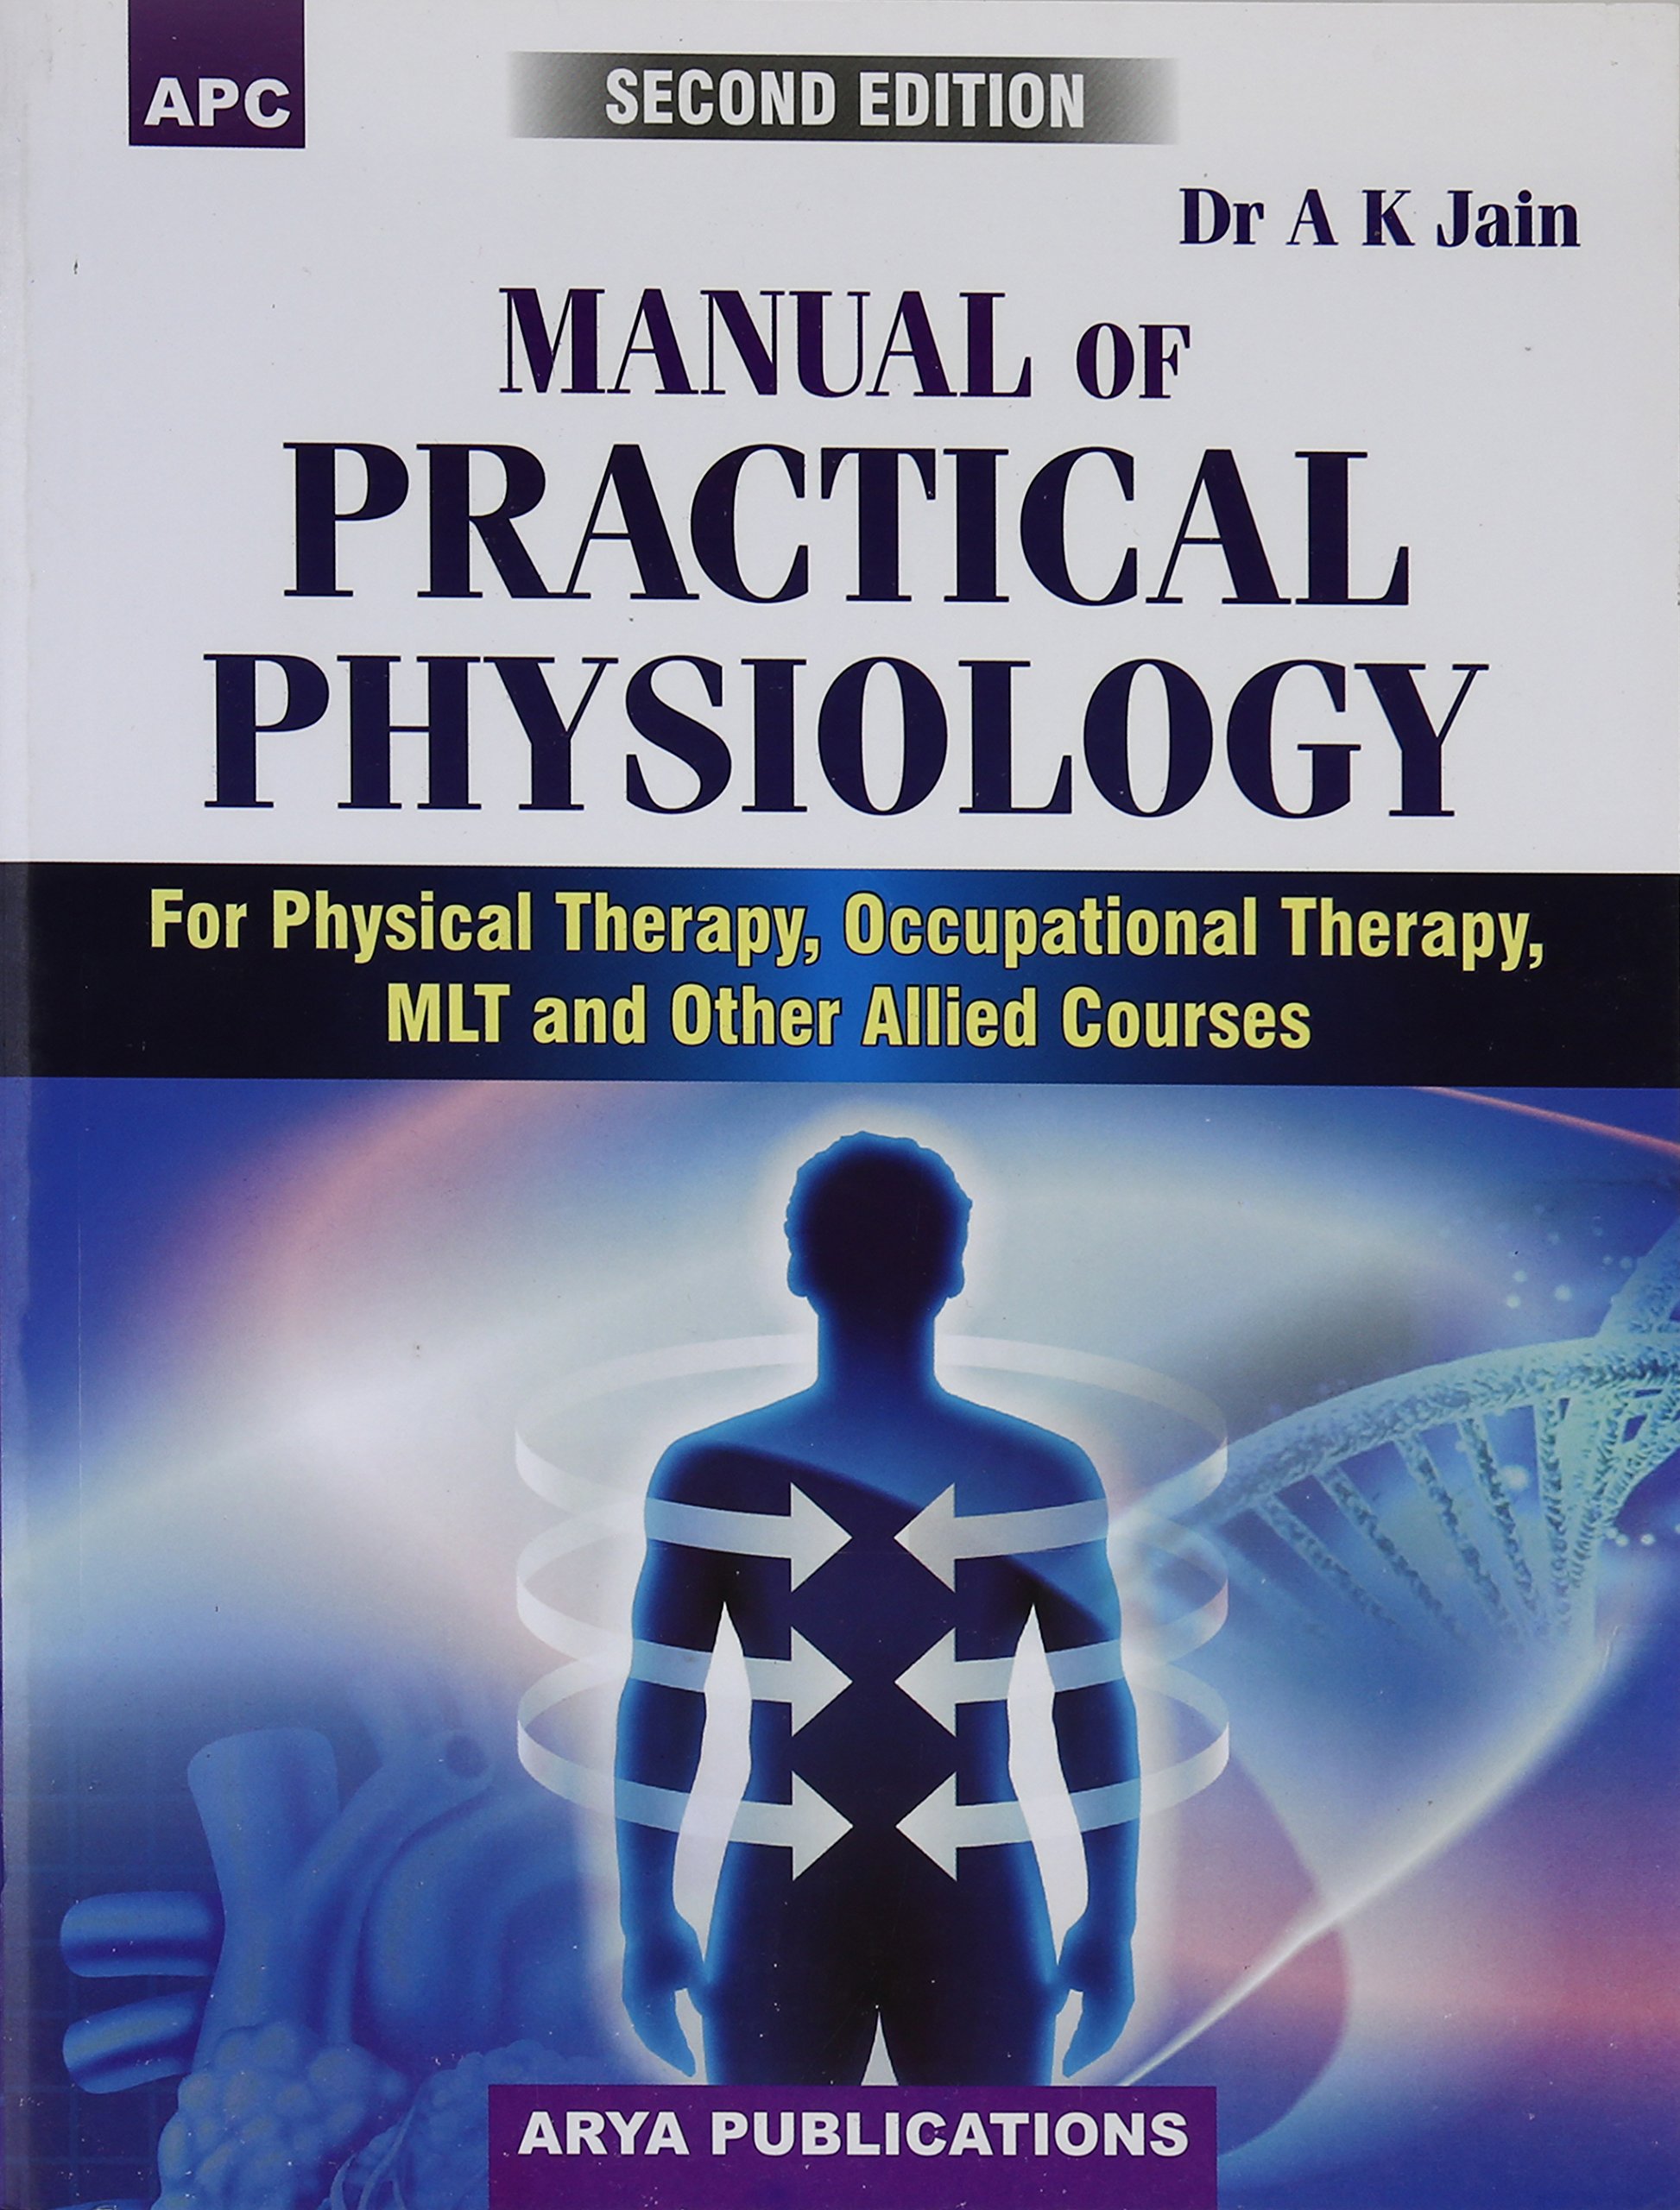 Manual Of Practical Physiology For Physical Therapy, Occupational Therapy 2E by Dr. A K Jain